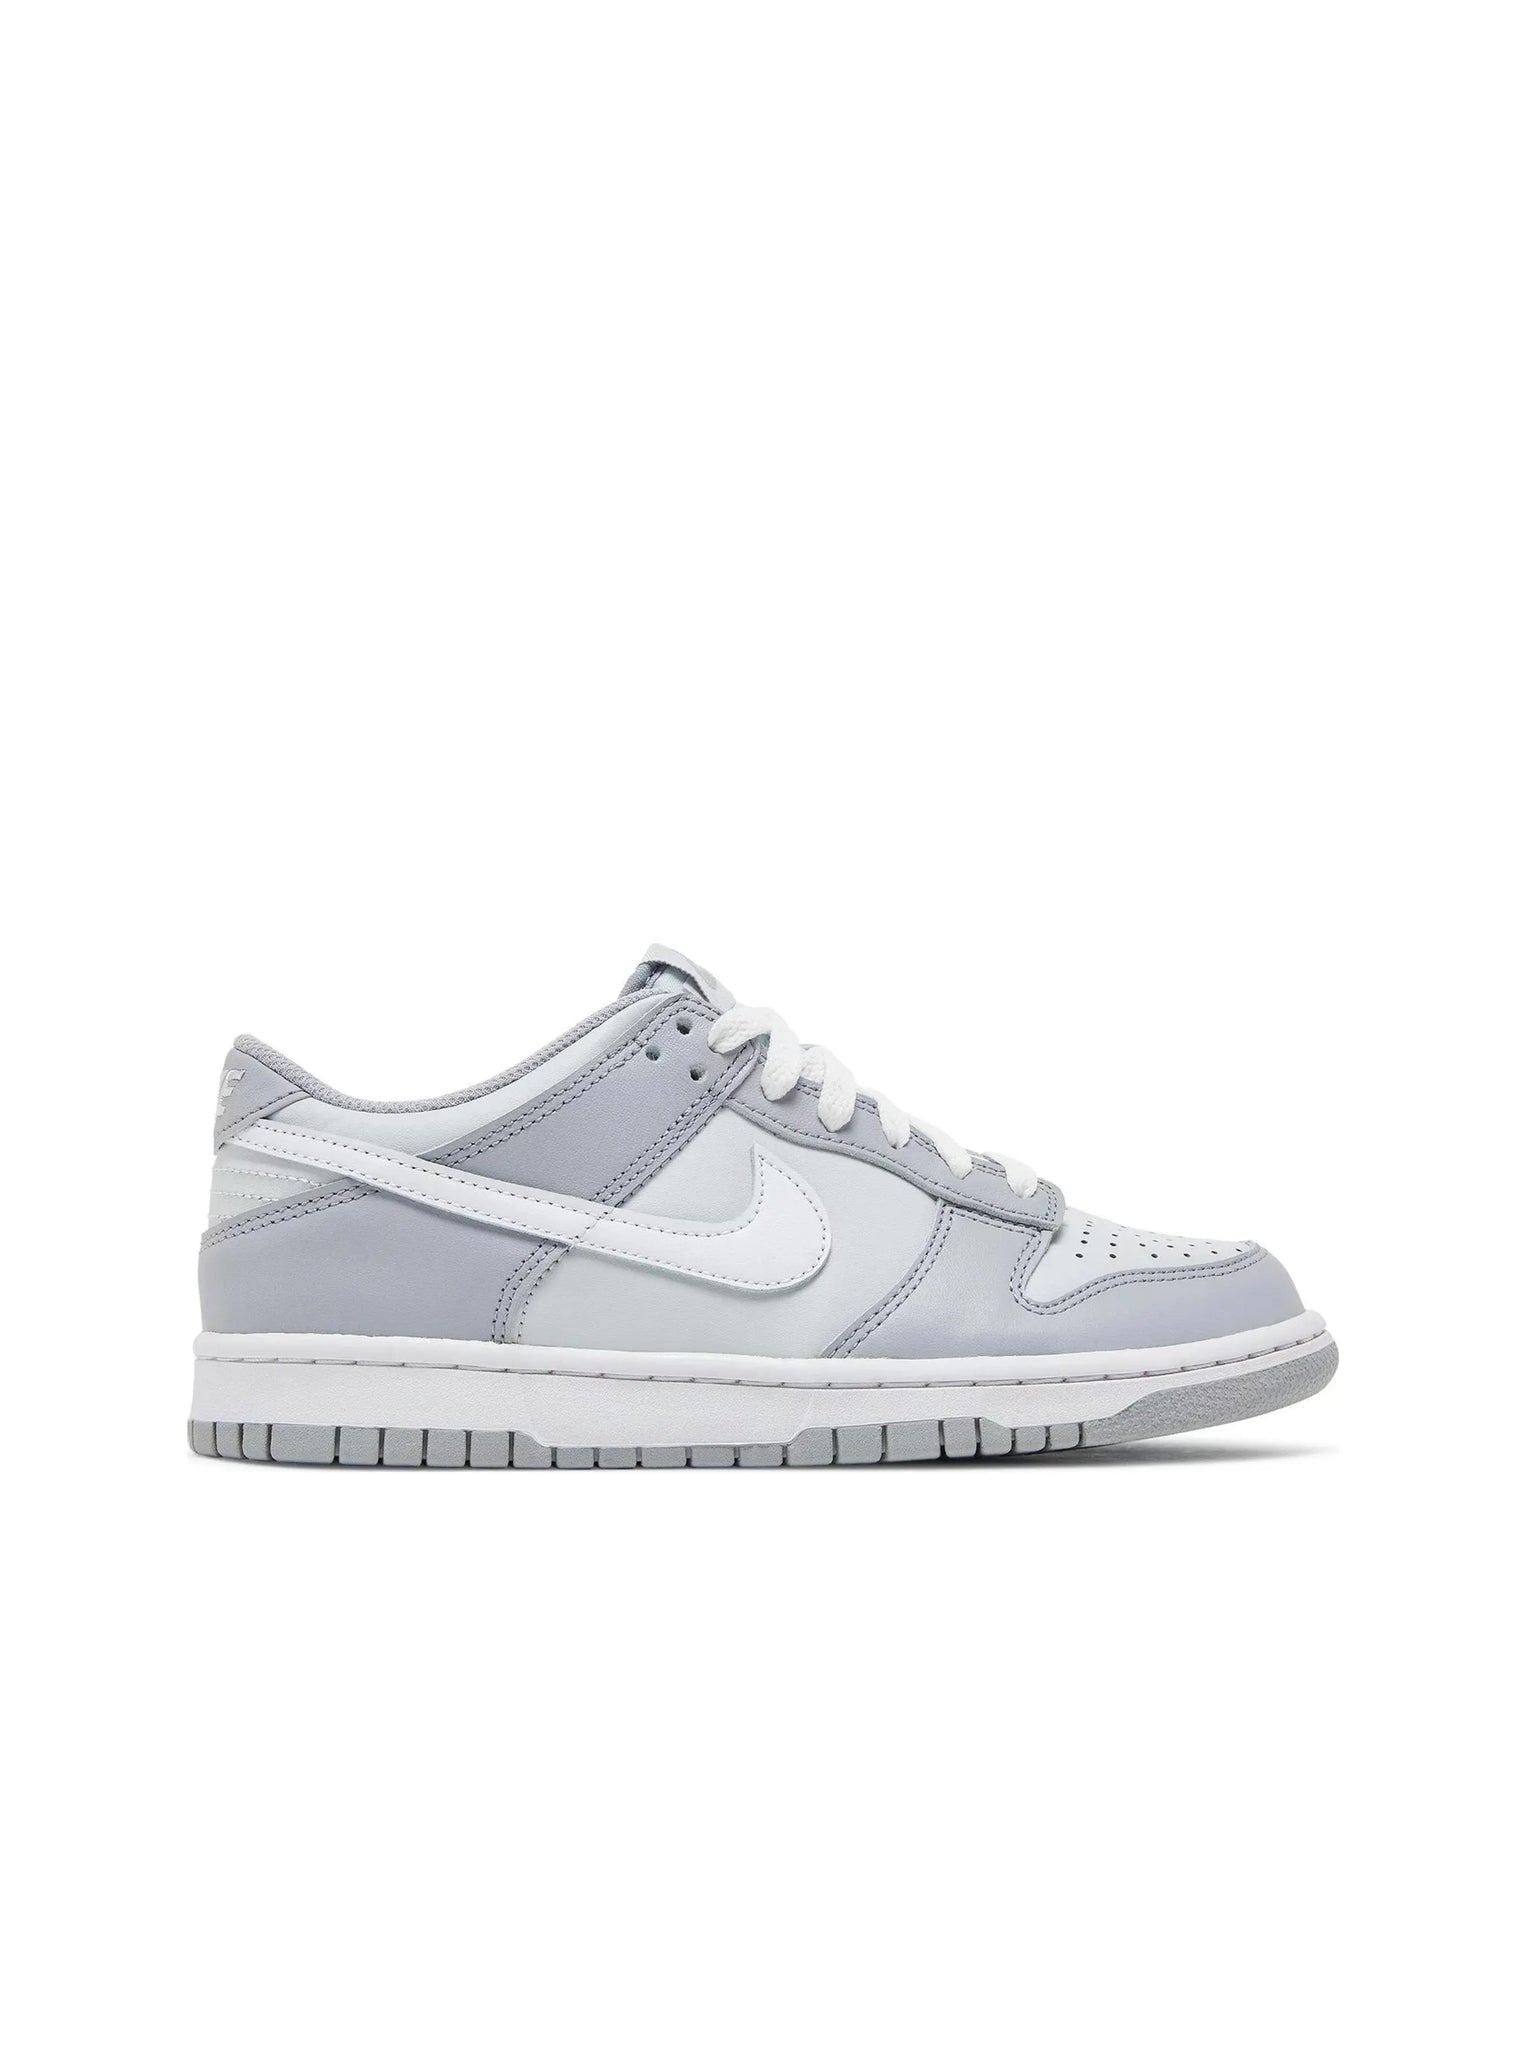 Nike Dunk Low Two-Toned Grey (GS) in Auckland, New Zealand - Shop name